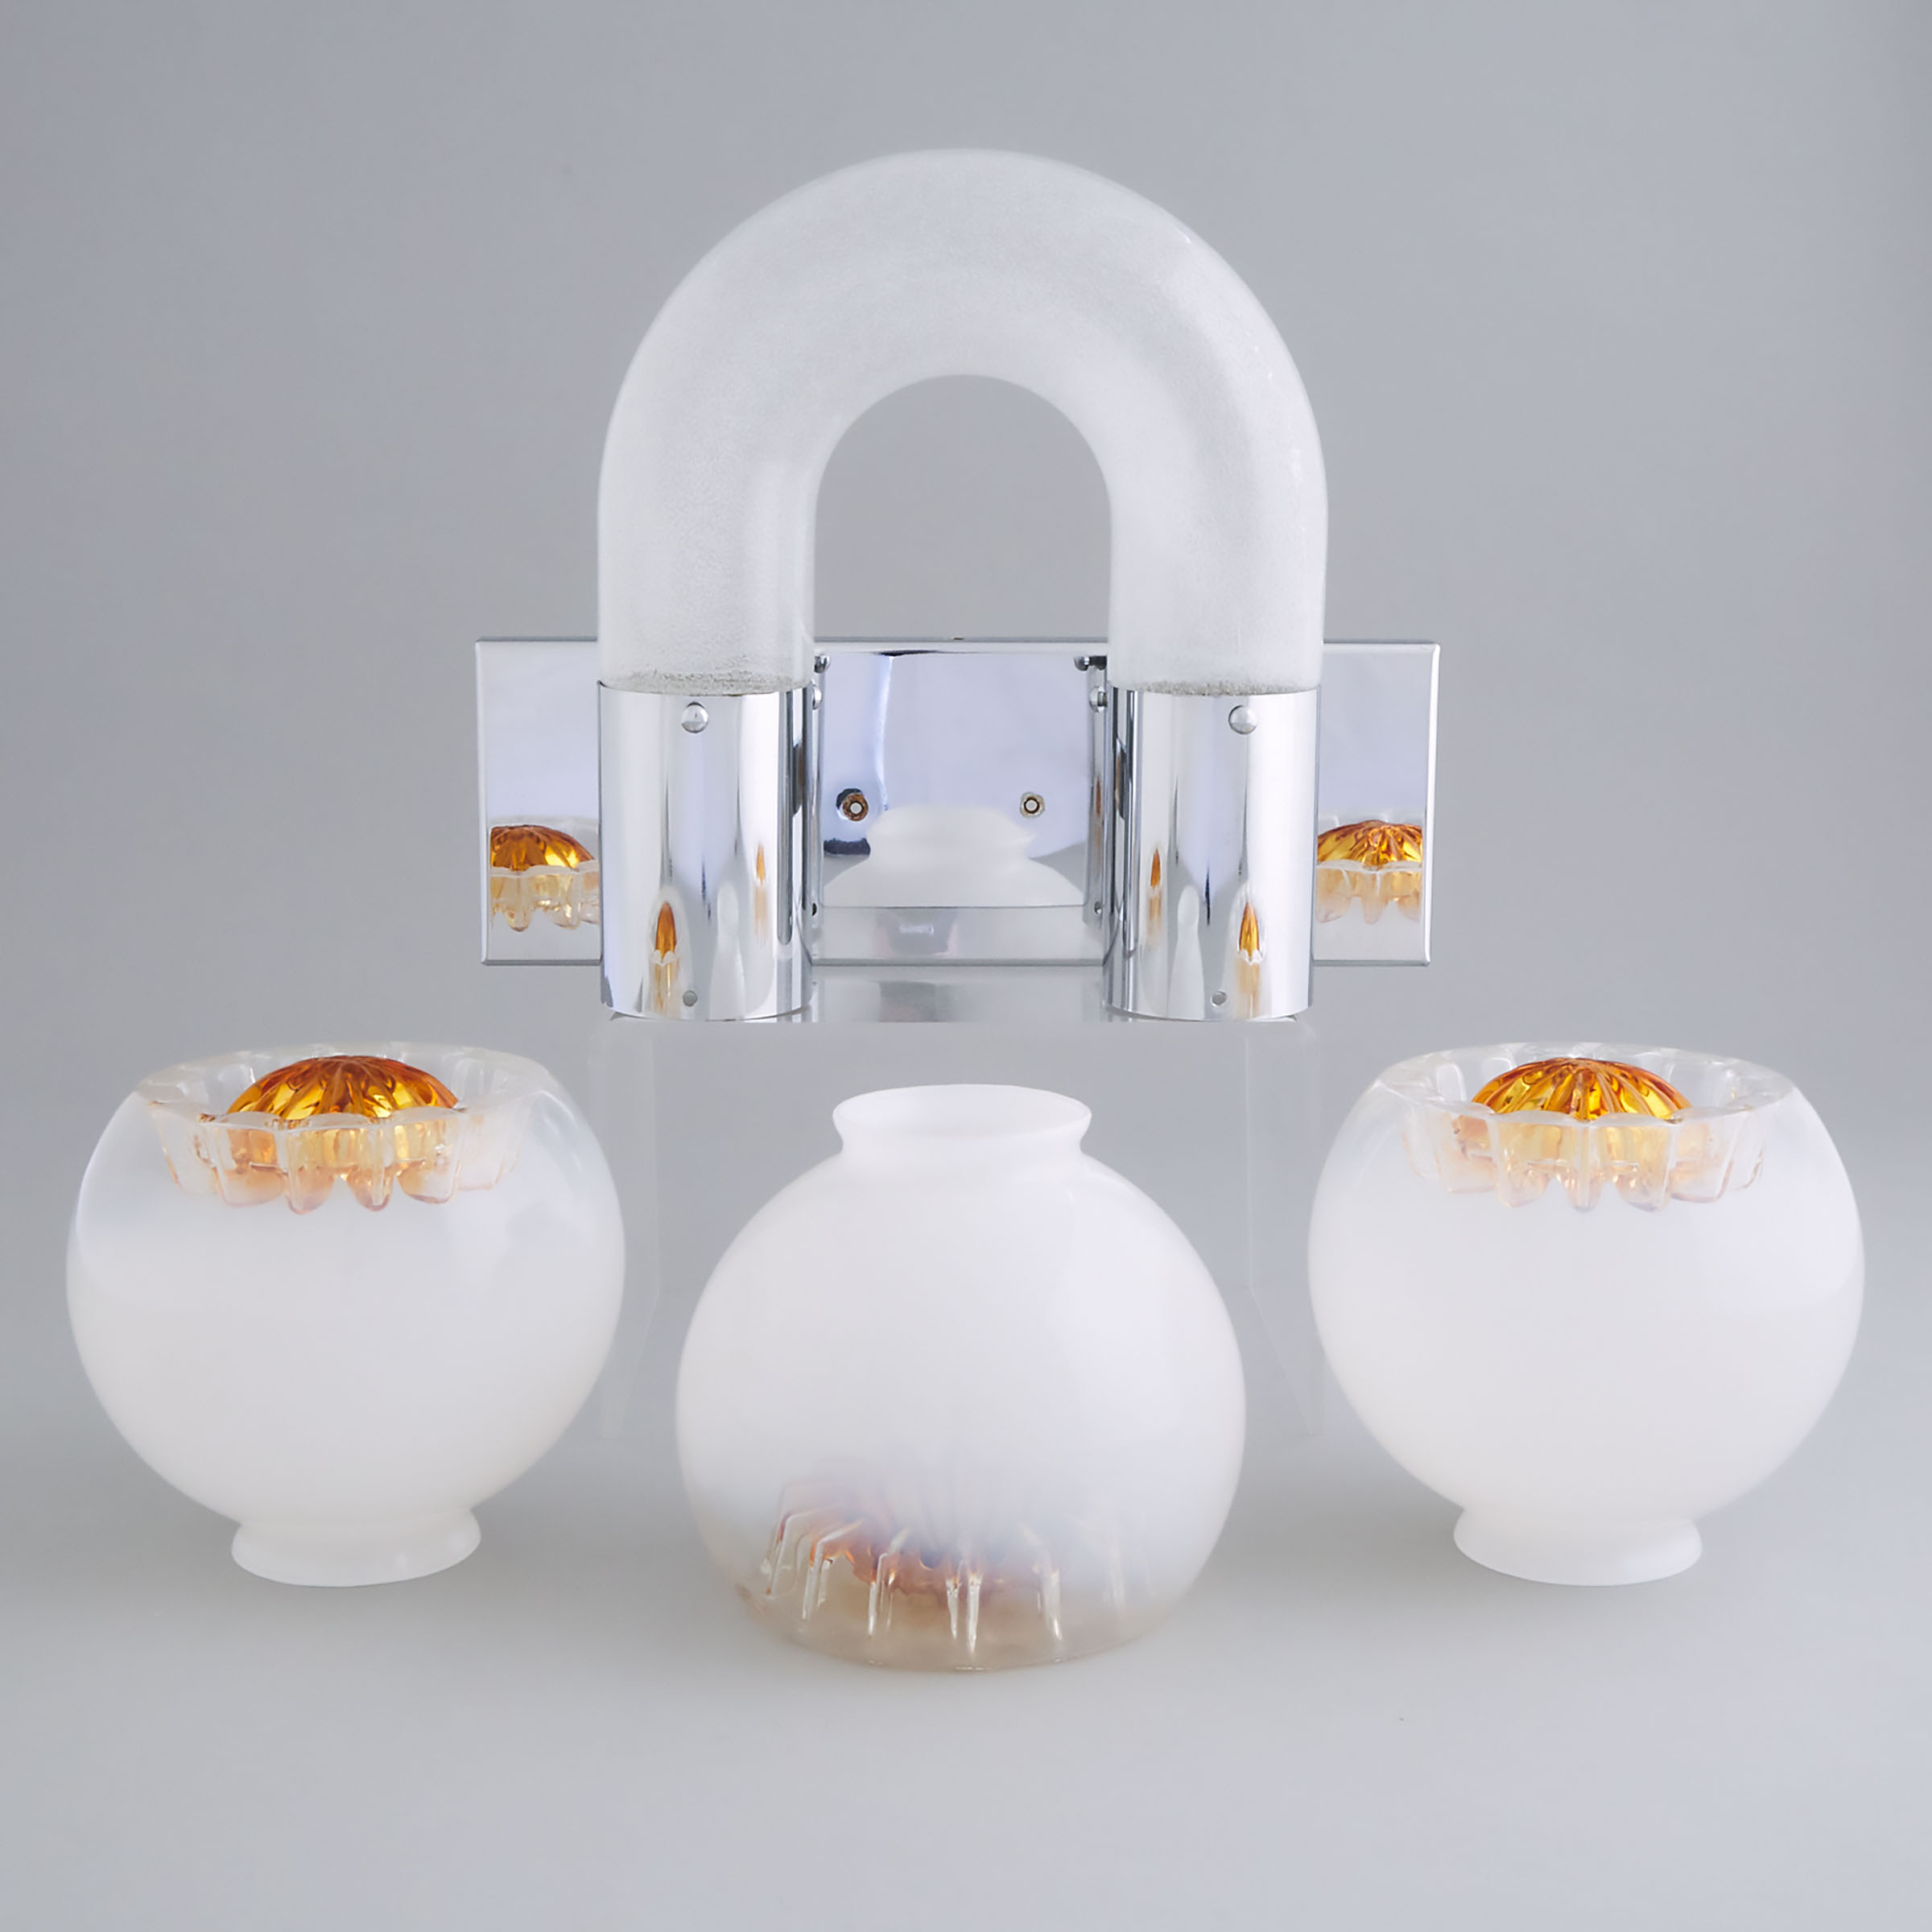 [Lighting Fixture Parts] Three Italian Opalescent and Amber Glass Diffusers and an Aldo Nason Wall Light all by Mazzega, Italy, c.1968